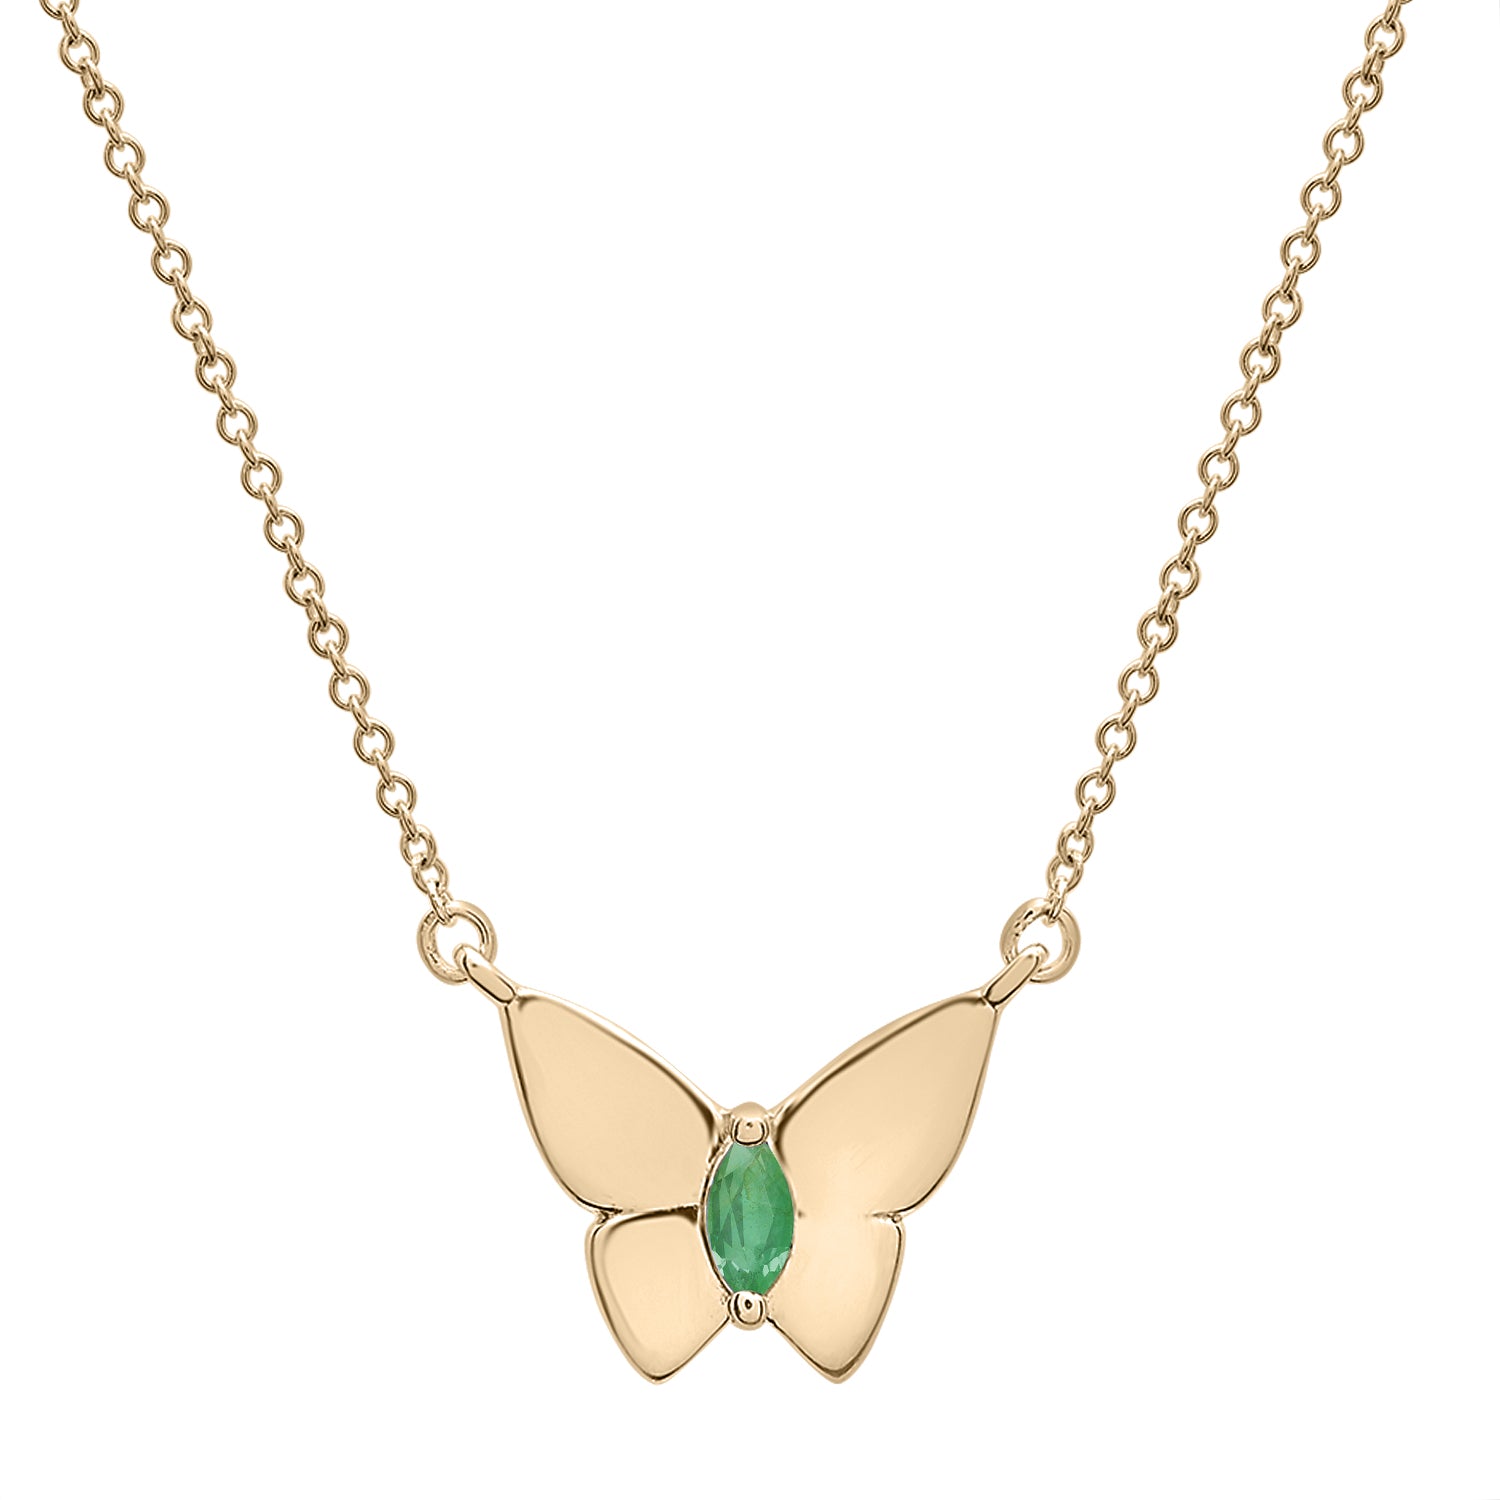 Green Stone Butterfly Birthstone Necklace in Gold chain